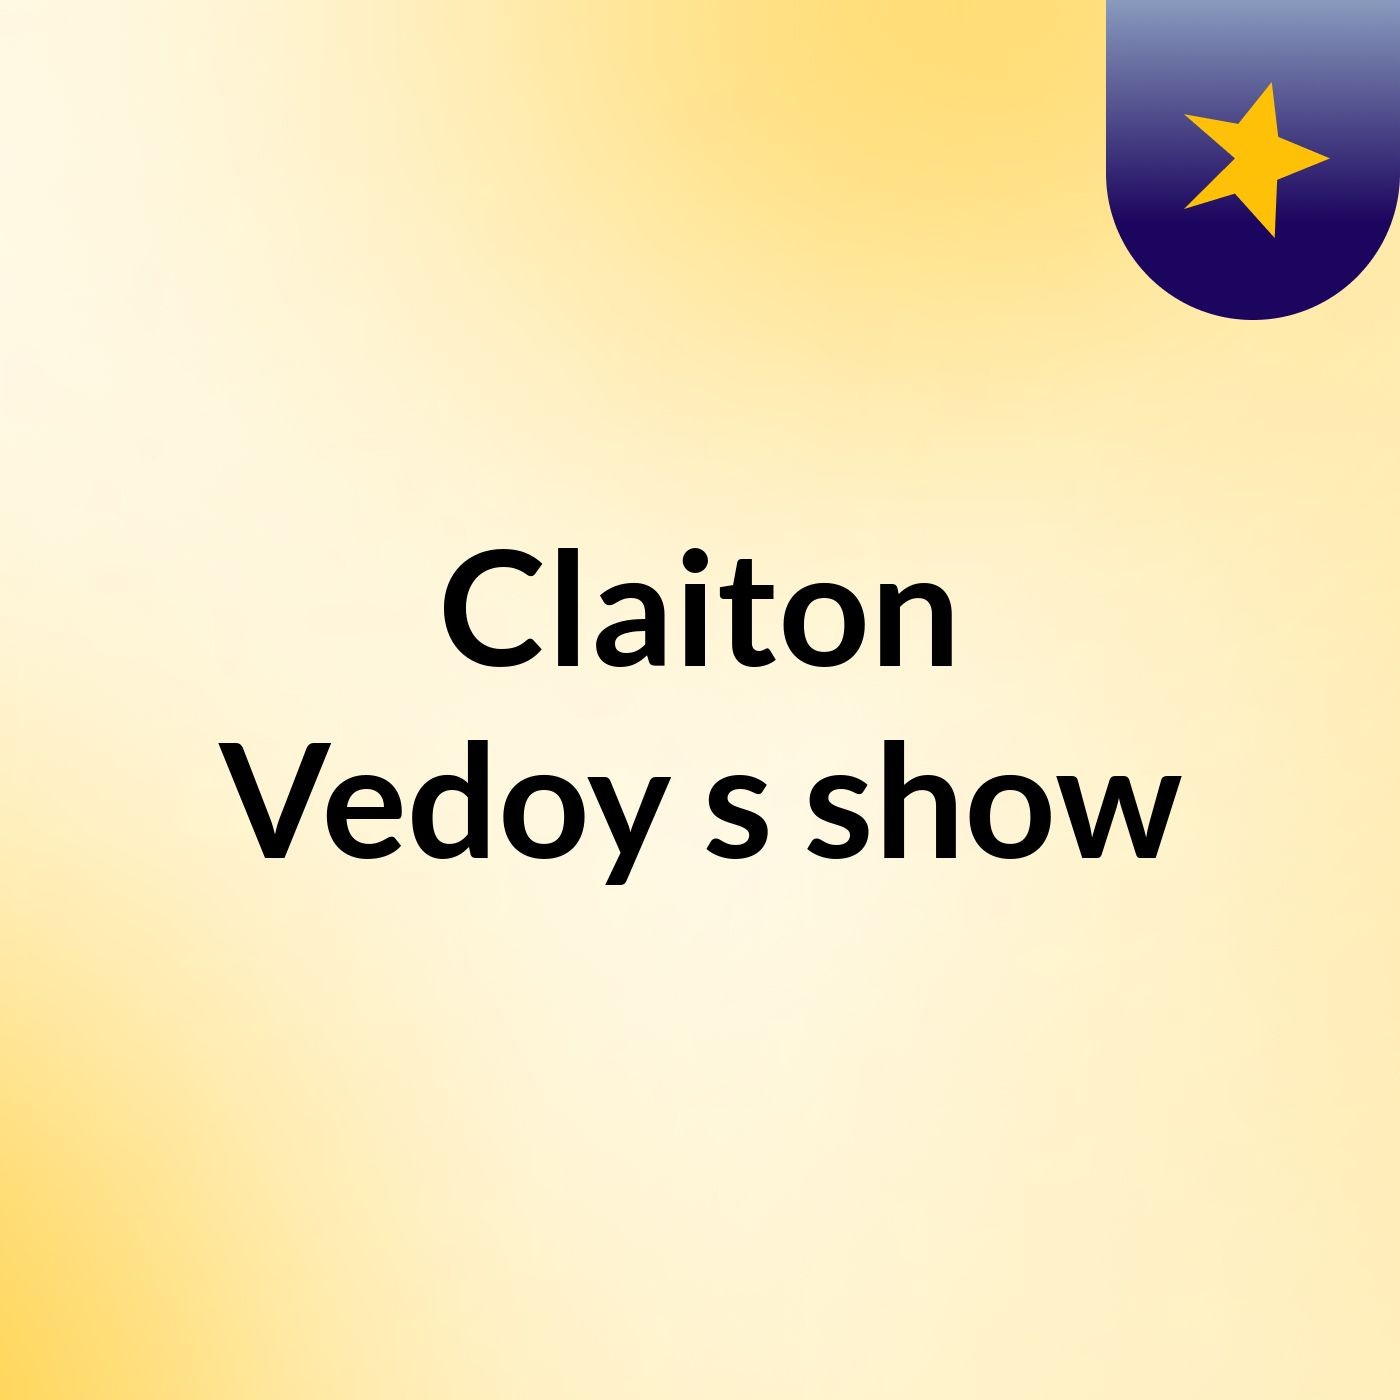 Claiton Vedoy's show